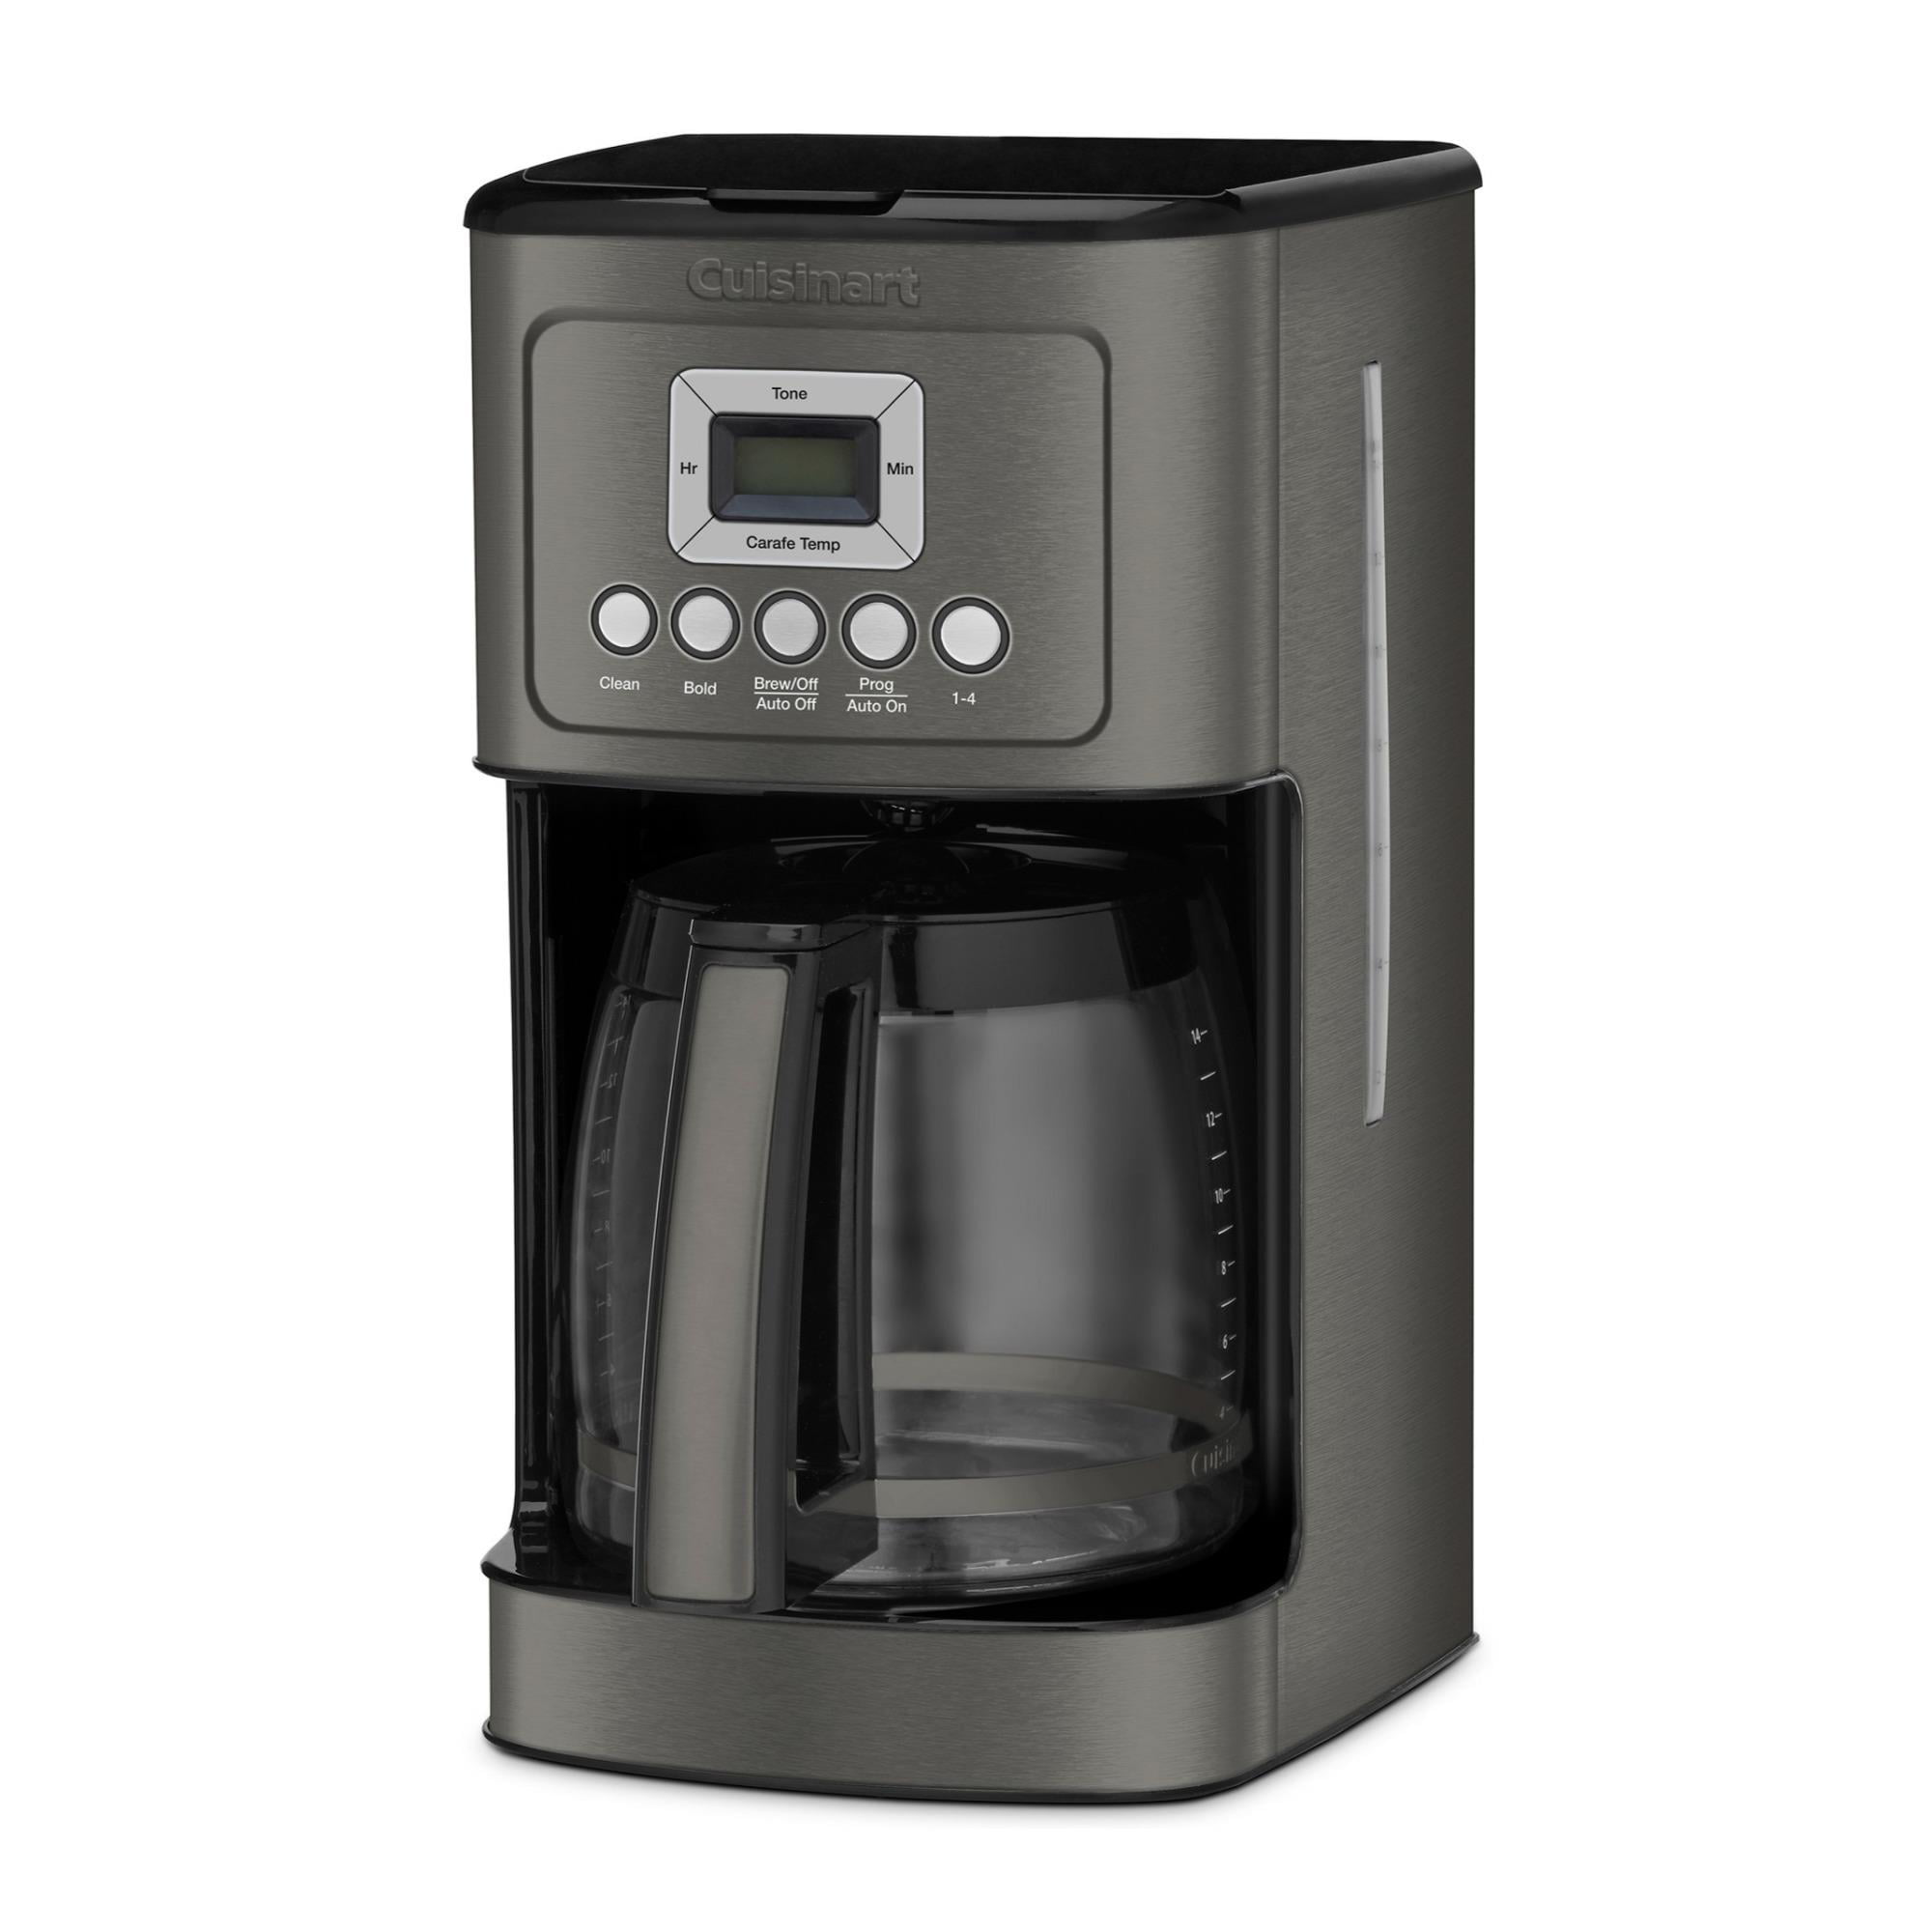 Cuisinart pro 220 volts Bean to cup coffee maker with insulated